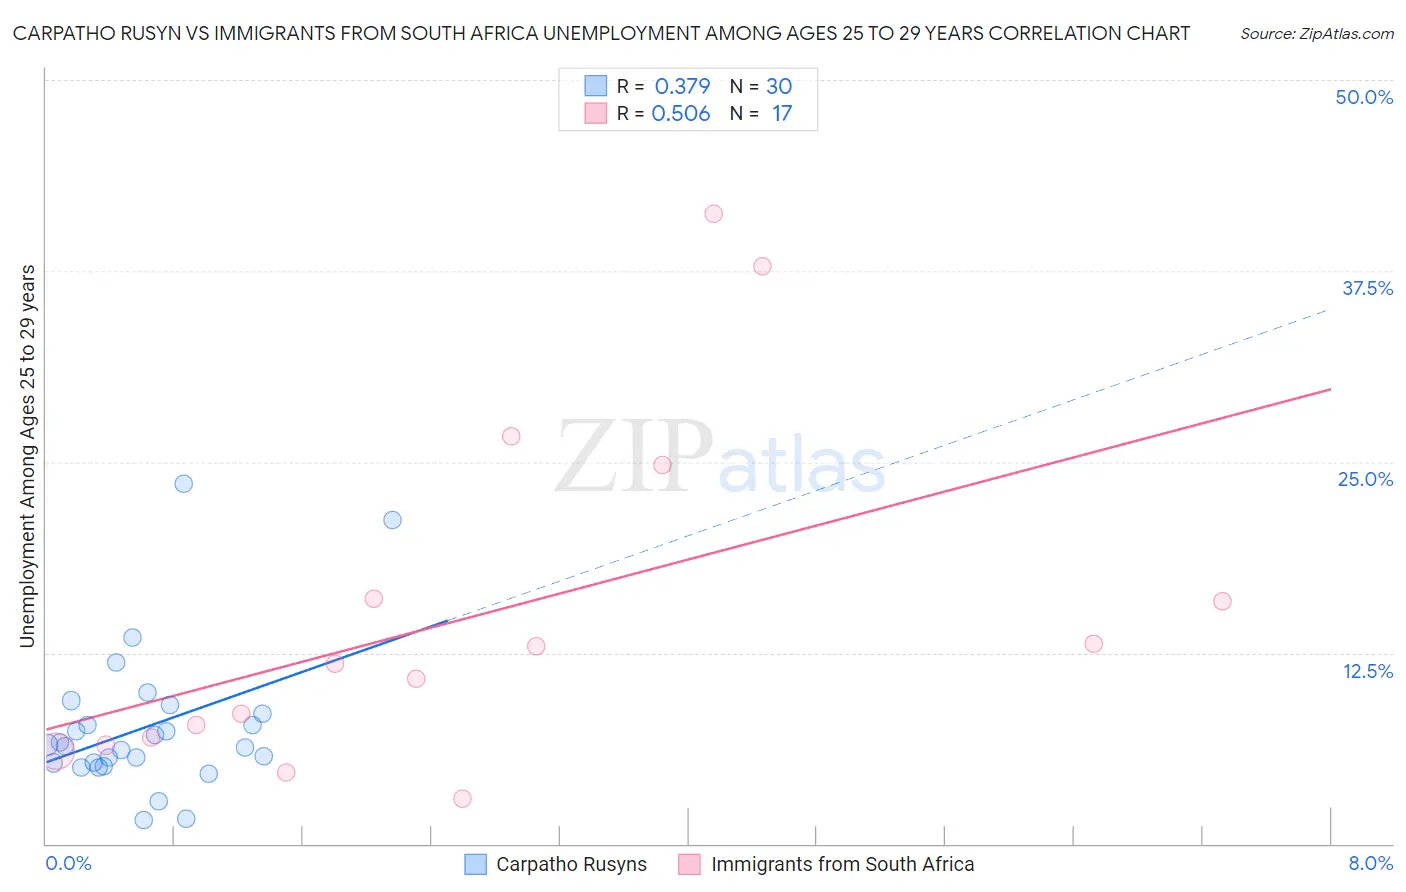 Carpatho Rusyn vs Immigrants from South Africa Unemployment Among Ages 25 to 29 years